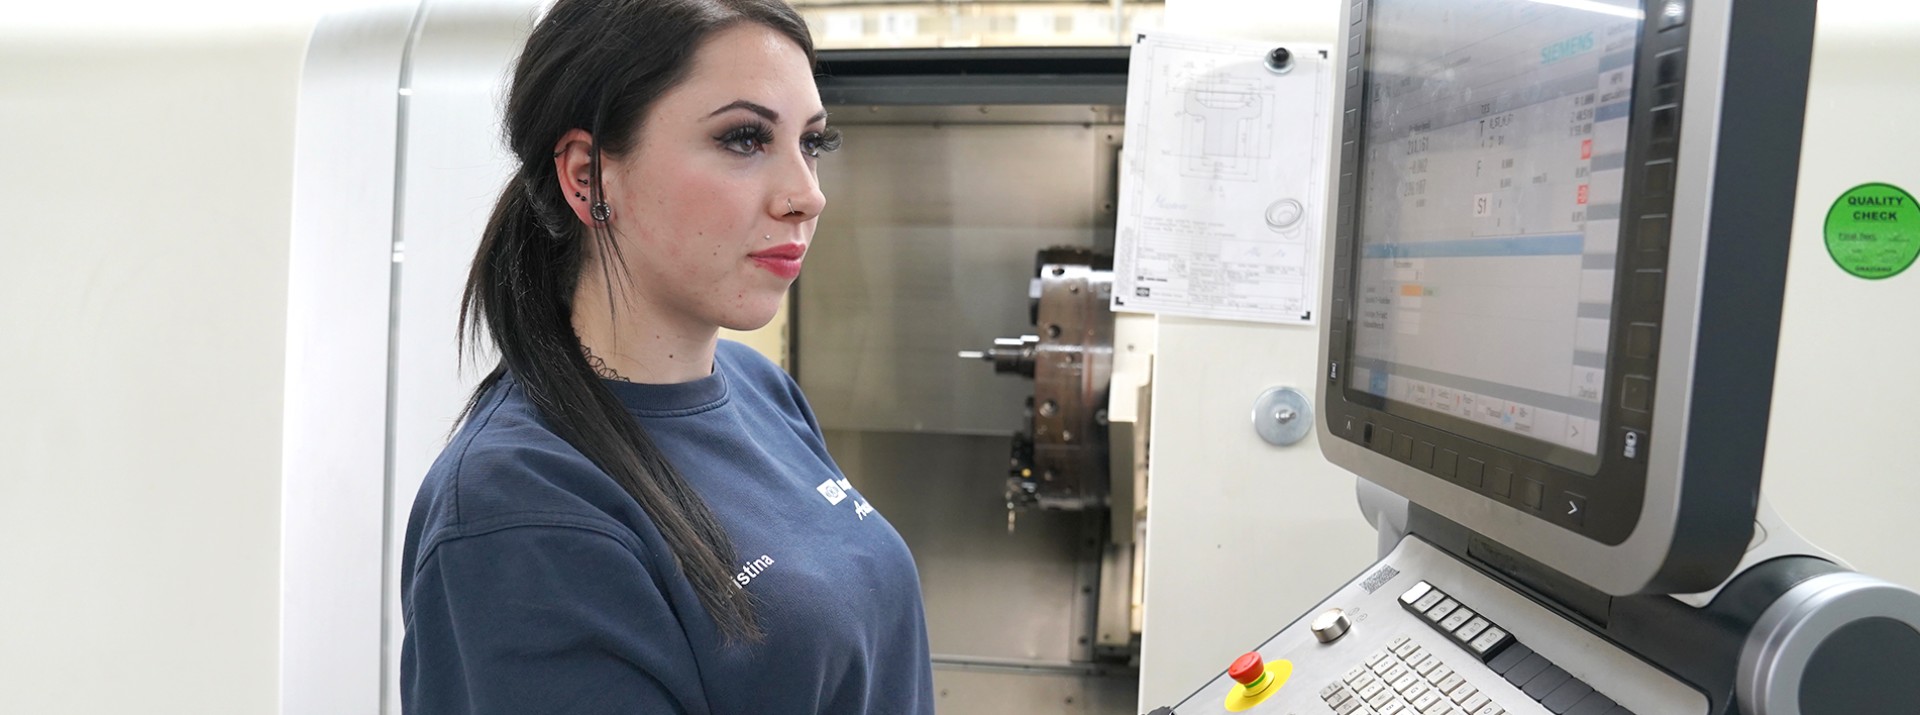 Kristina Bieder, an apprentice at Knorr-Bremse in Aldersbach, in front of an operating screen of a cutting machine.